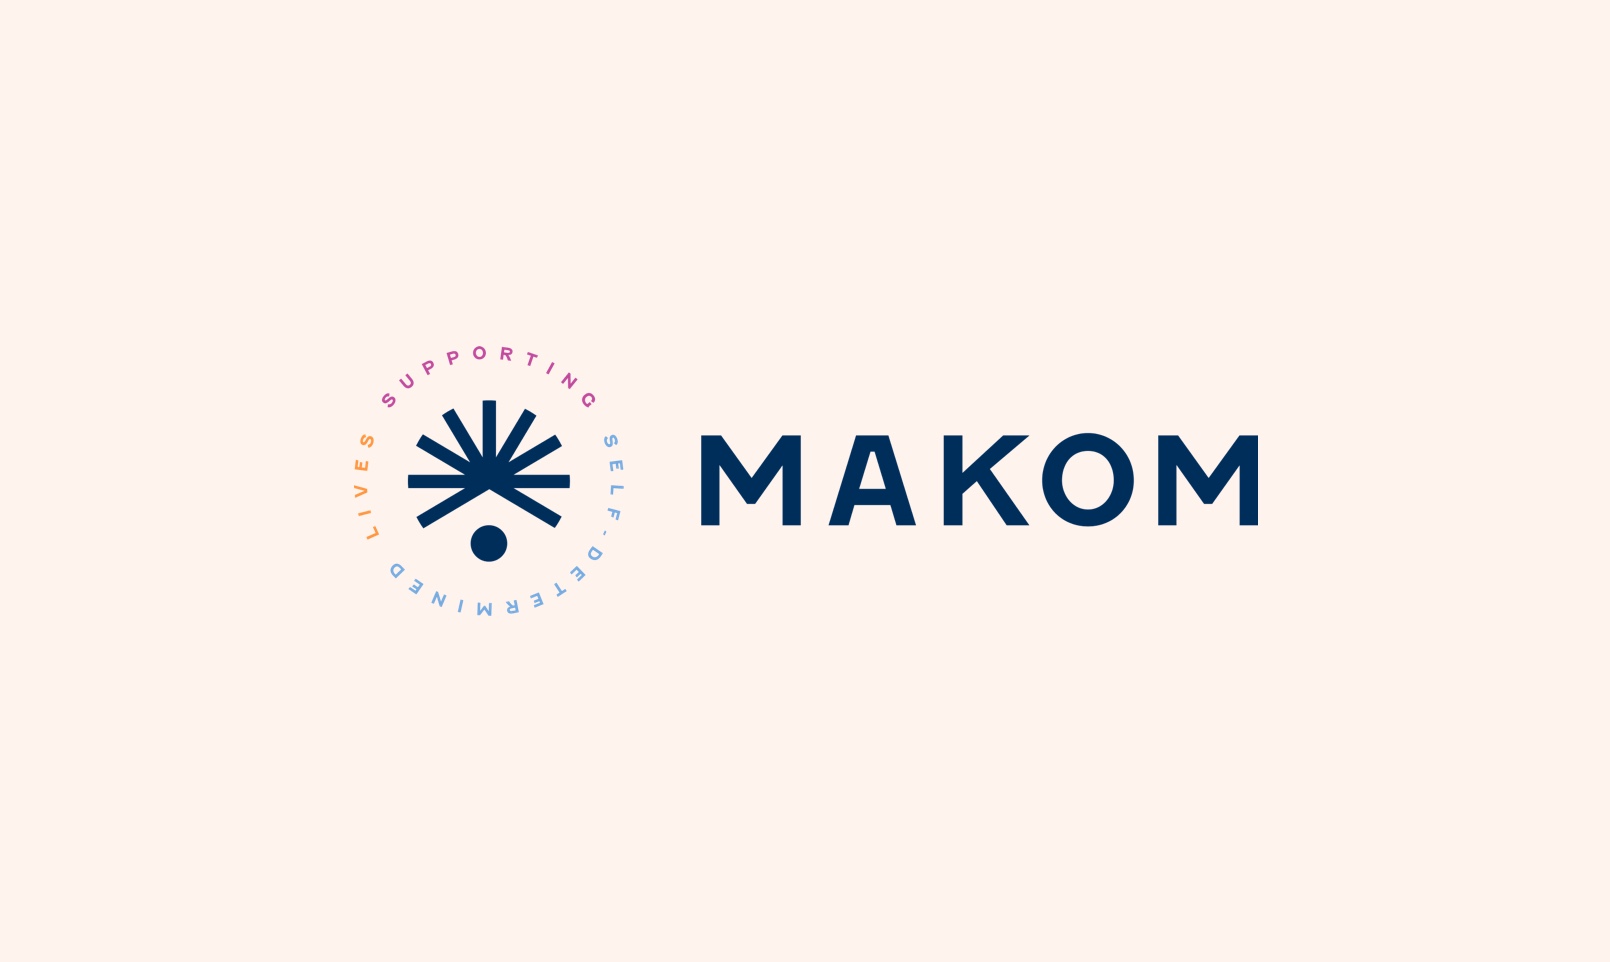 radiating starburst icon with the text 'supporting self-determined lives' around it, with the word 'MAKOM' in all caps